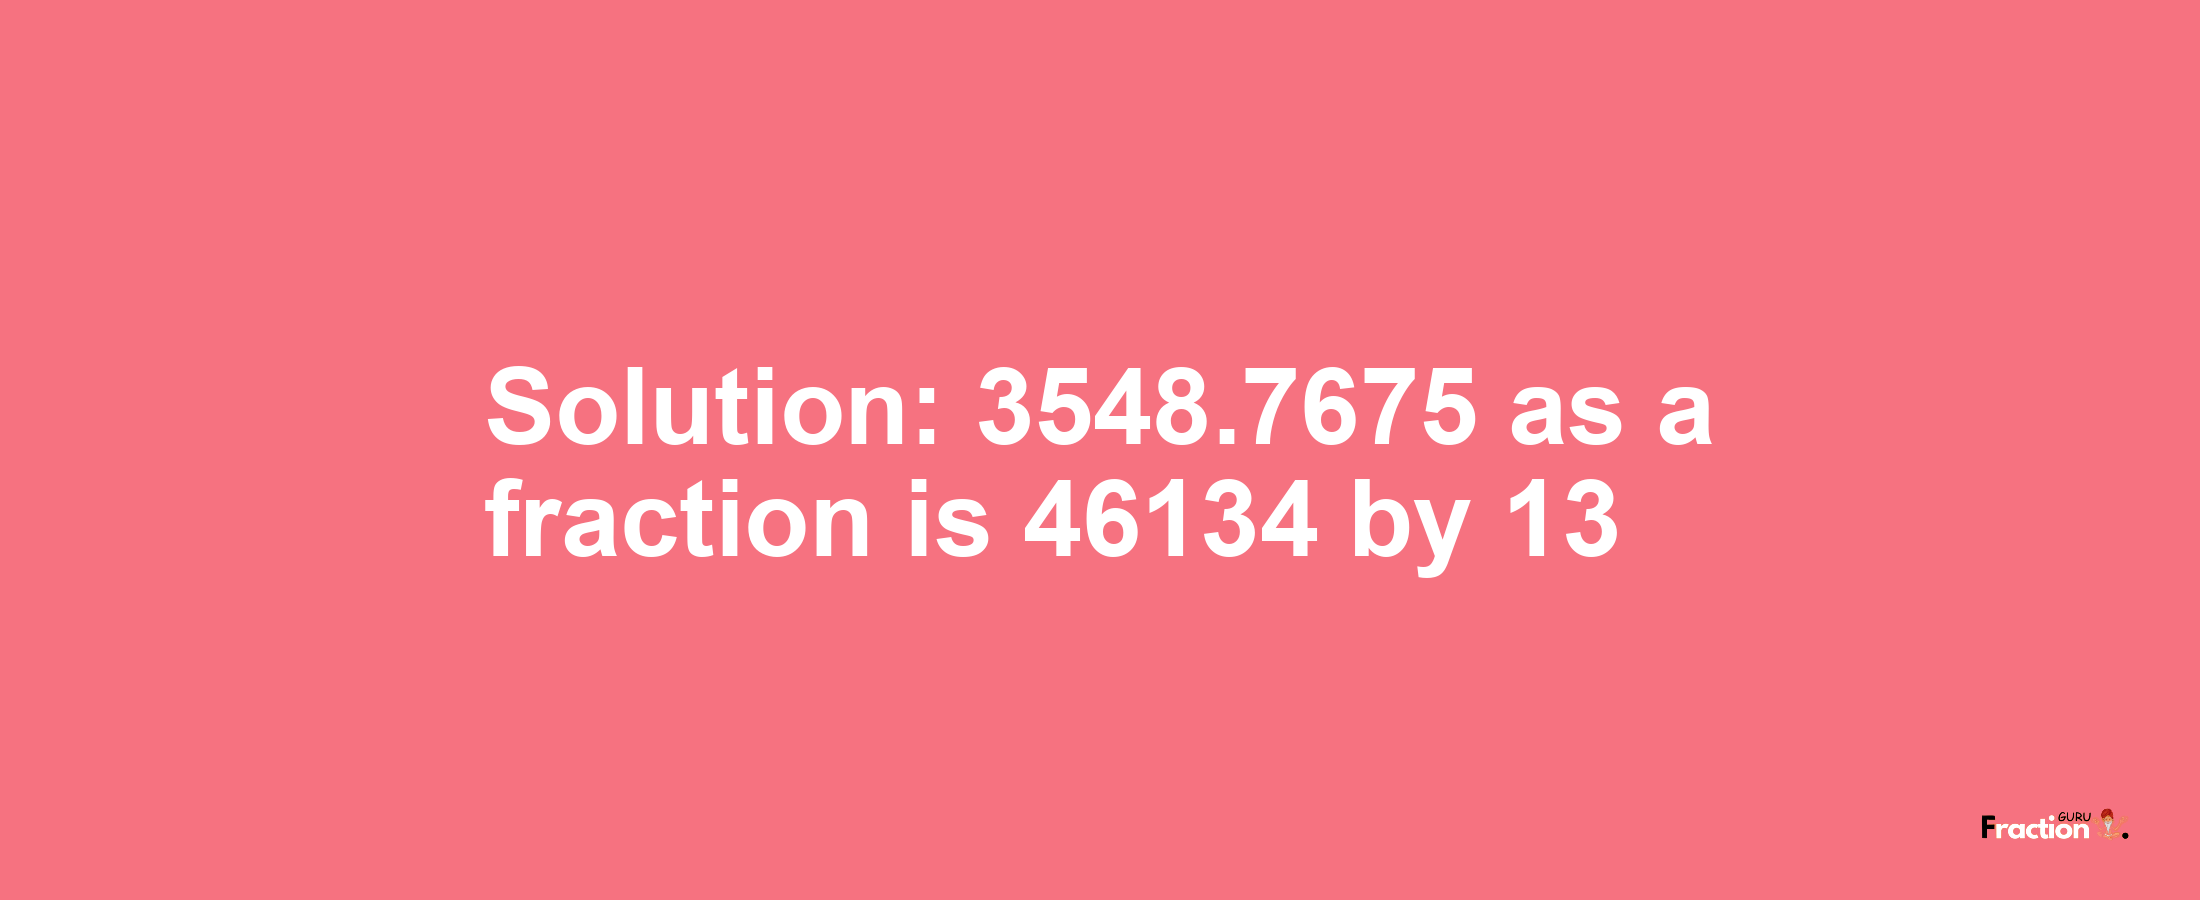 Solution:3548.7675 as a fraction is 46134/13